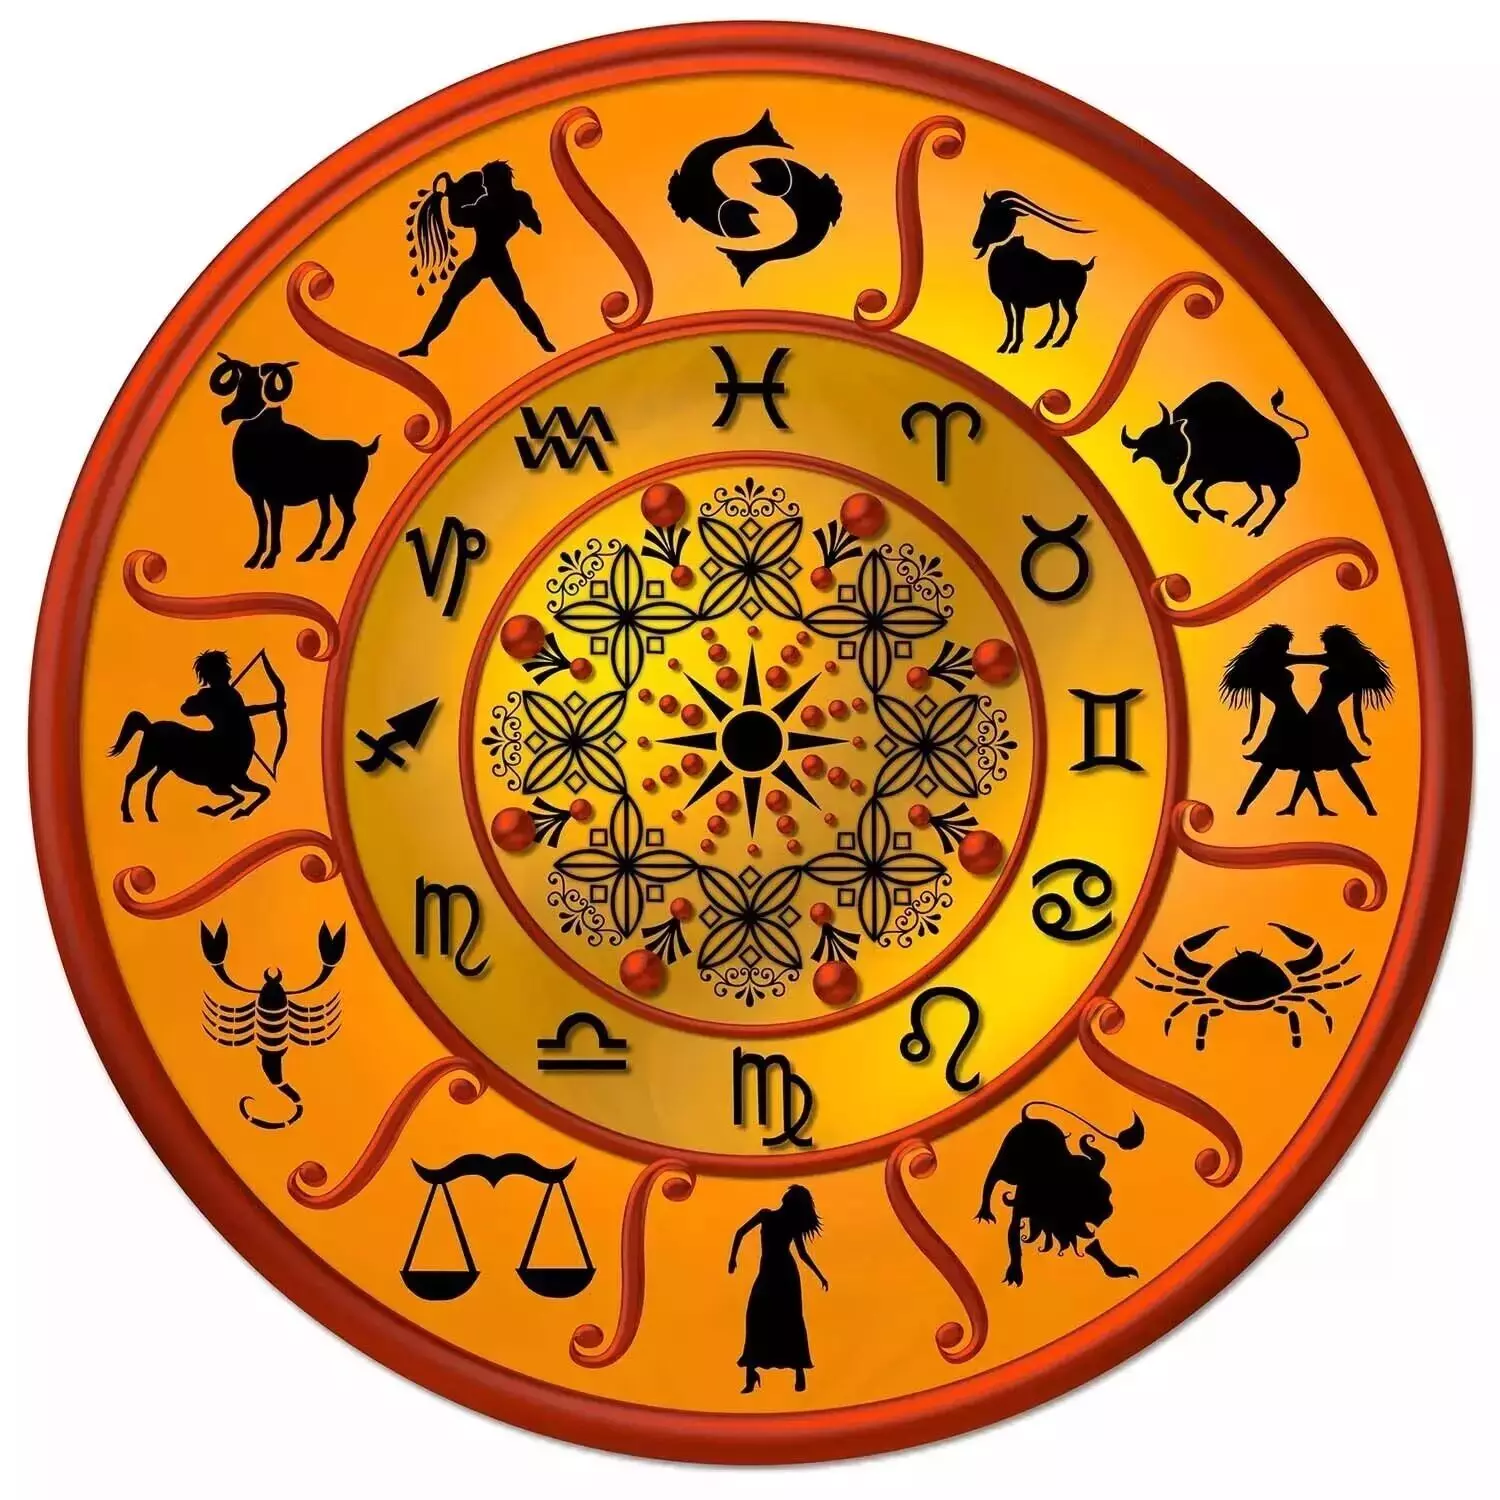 17 March  – Know your todays horoscope